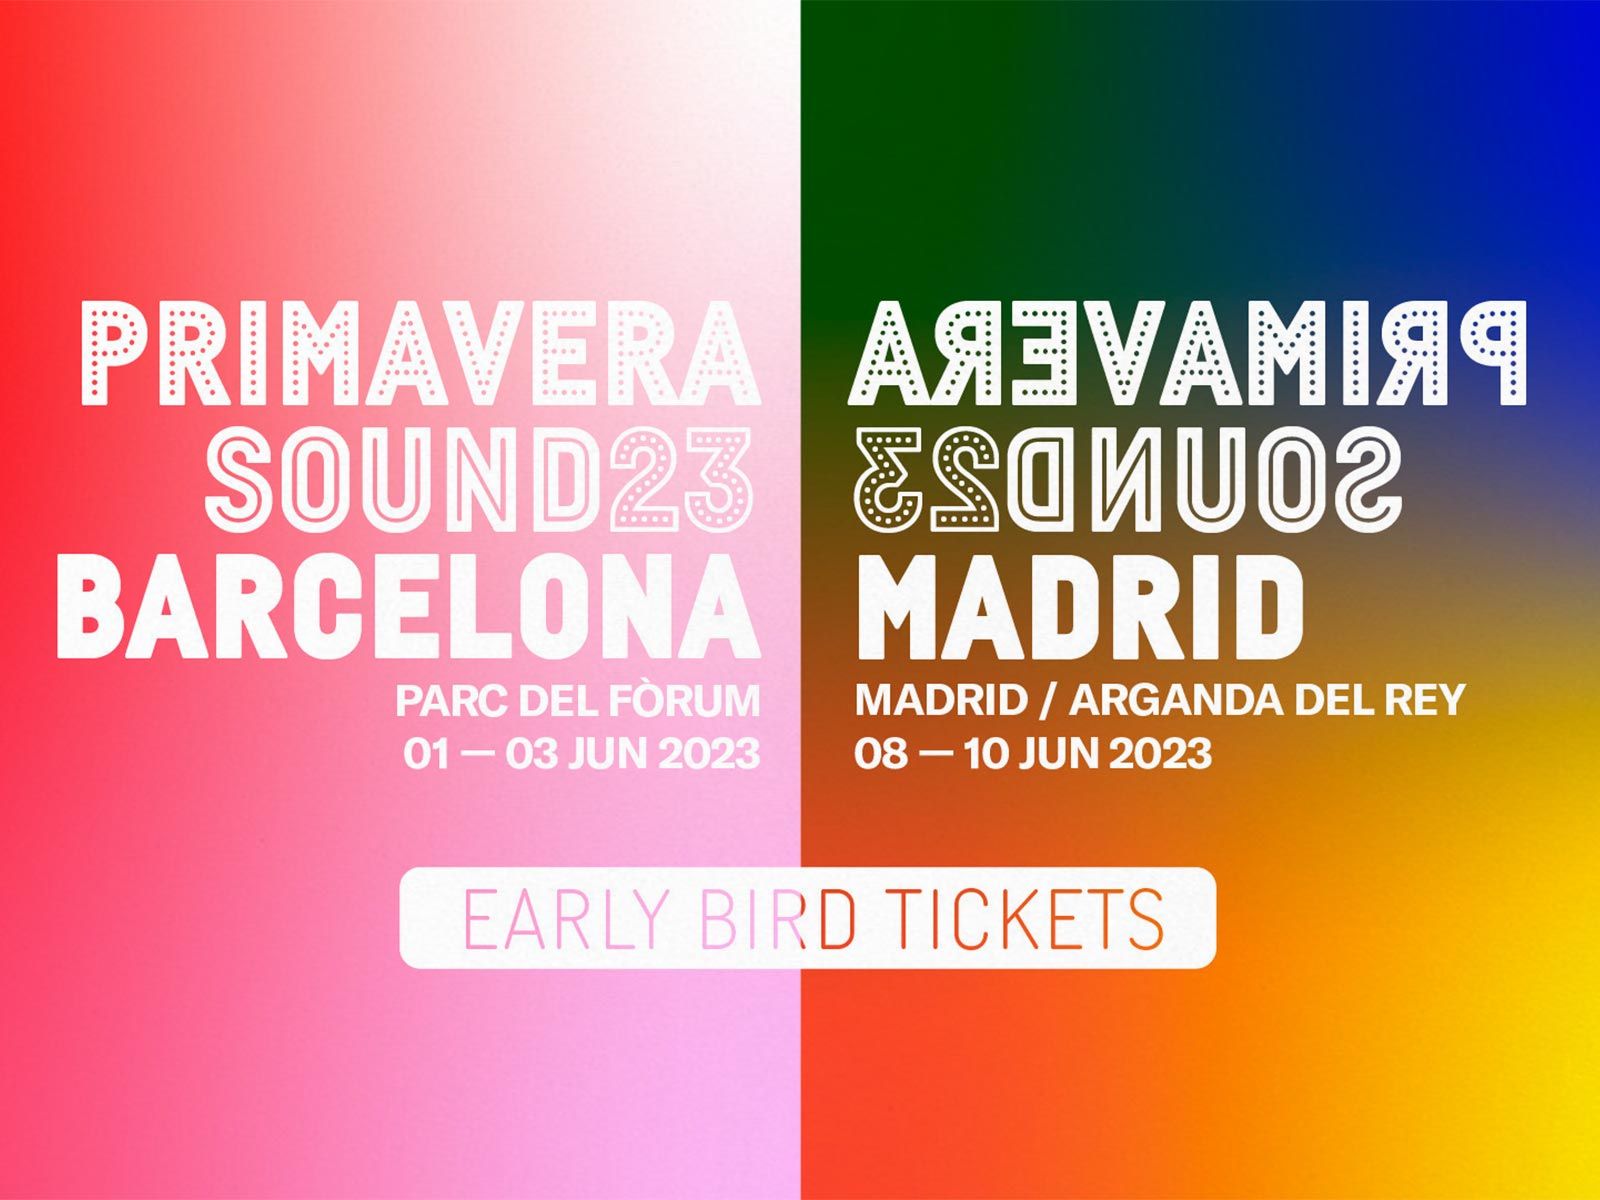 Get your Early Bird ticket for Primavera Sound 2023